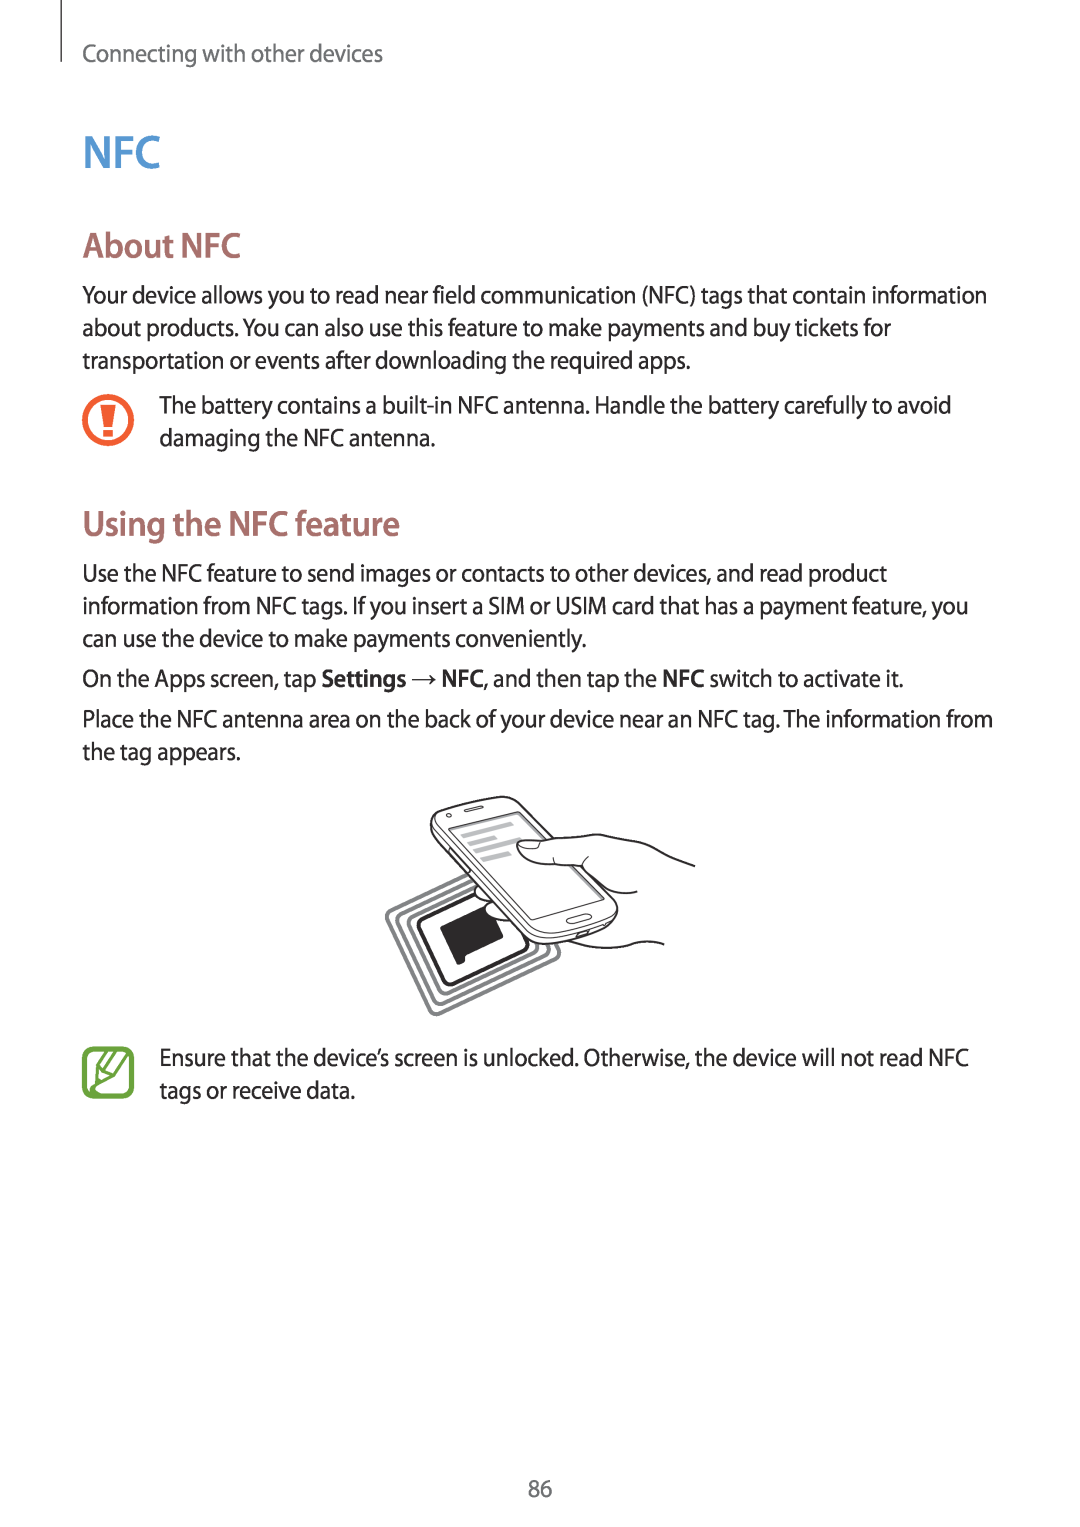 Samsung SM-G357FZWZHTS, SM-G357FZWZXEO, SM-G357FZWZOPT manual About NFC, Using the NFC feature, Connecting with other devices 